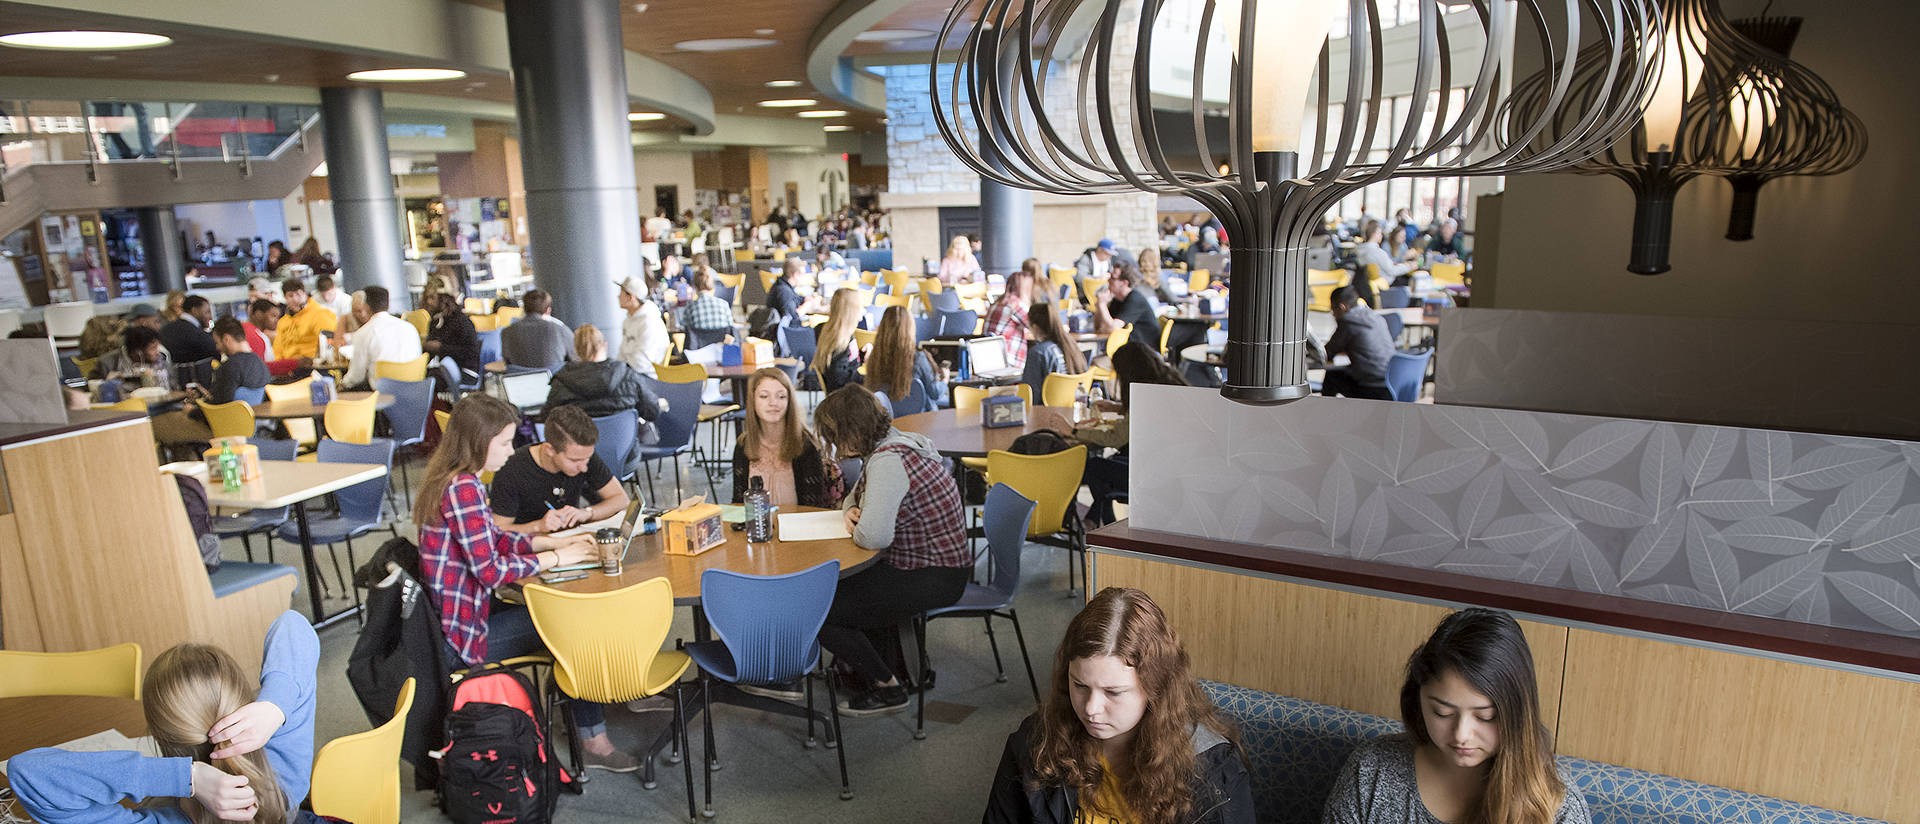 Students eat and study in Davies Center